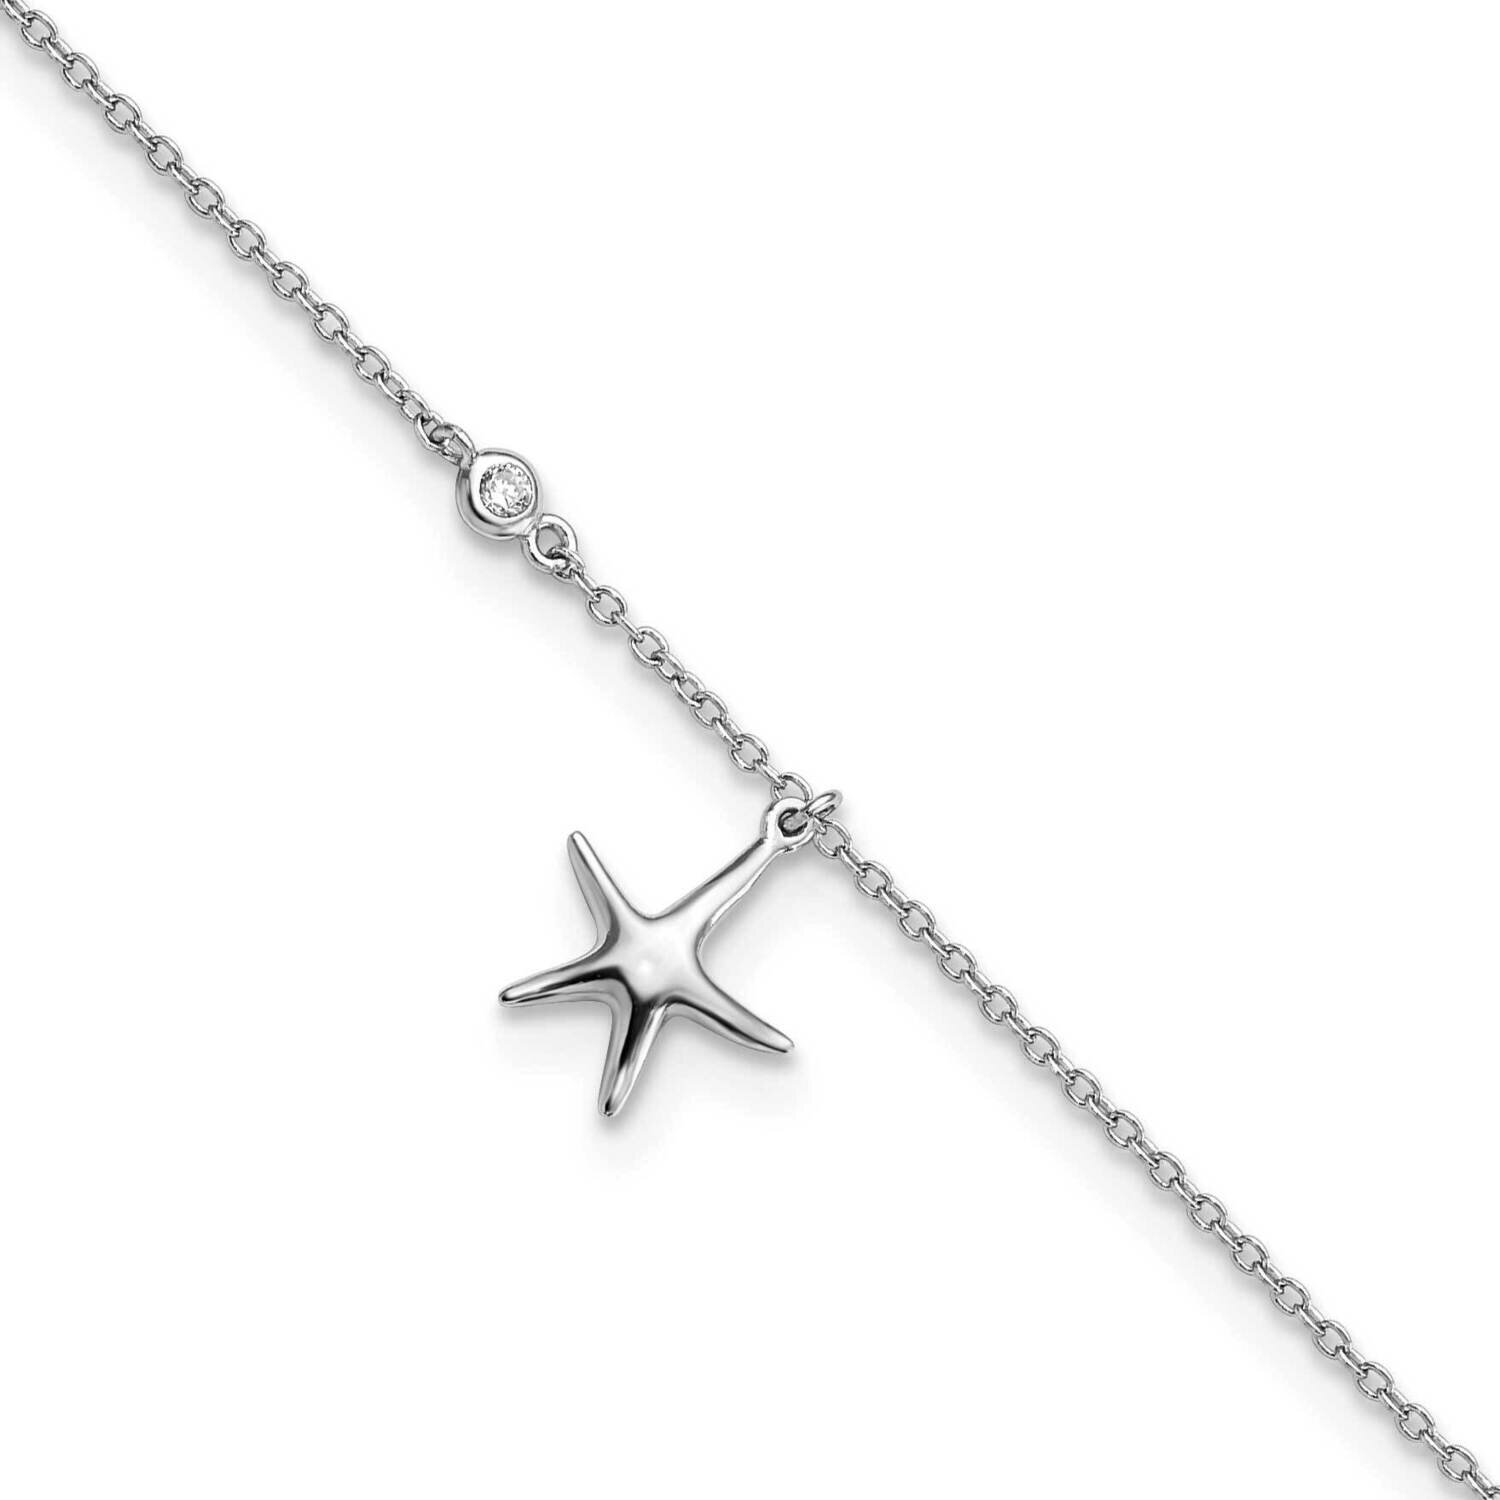 Polished CZ Diamond Starfish 9 Inch Plus 1 Inch Extender Anklet Sterling Silver Rhodium-Plated QG5760-9